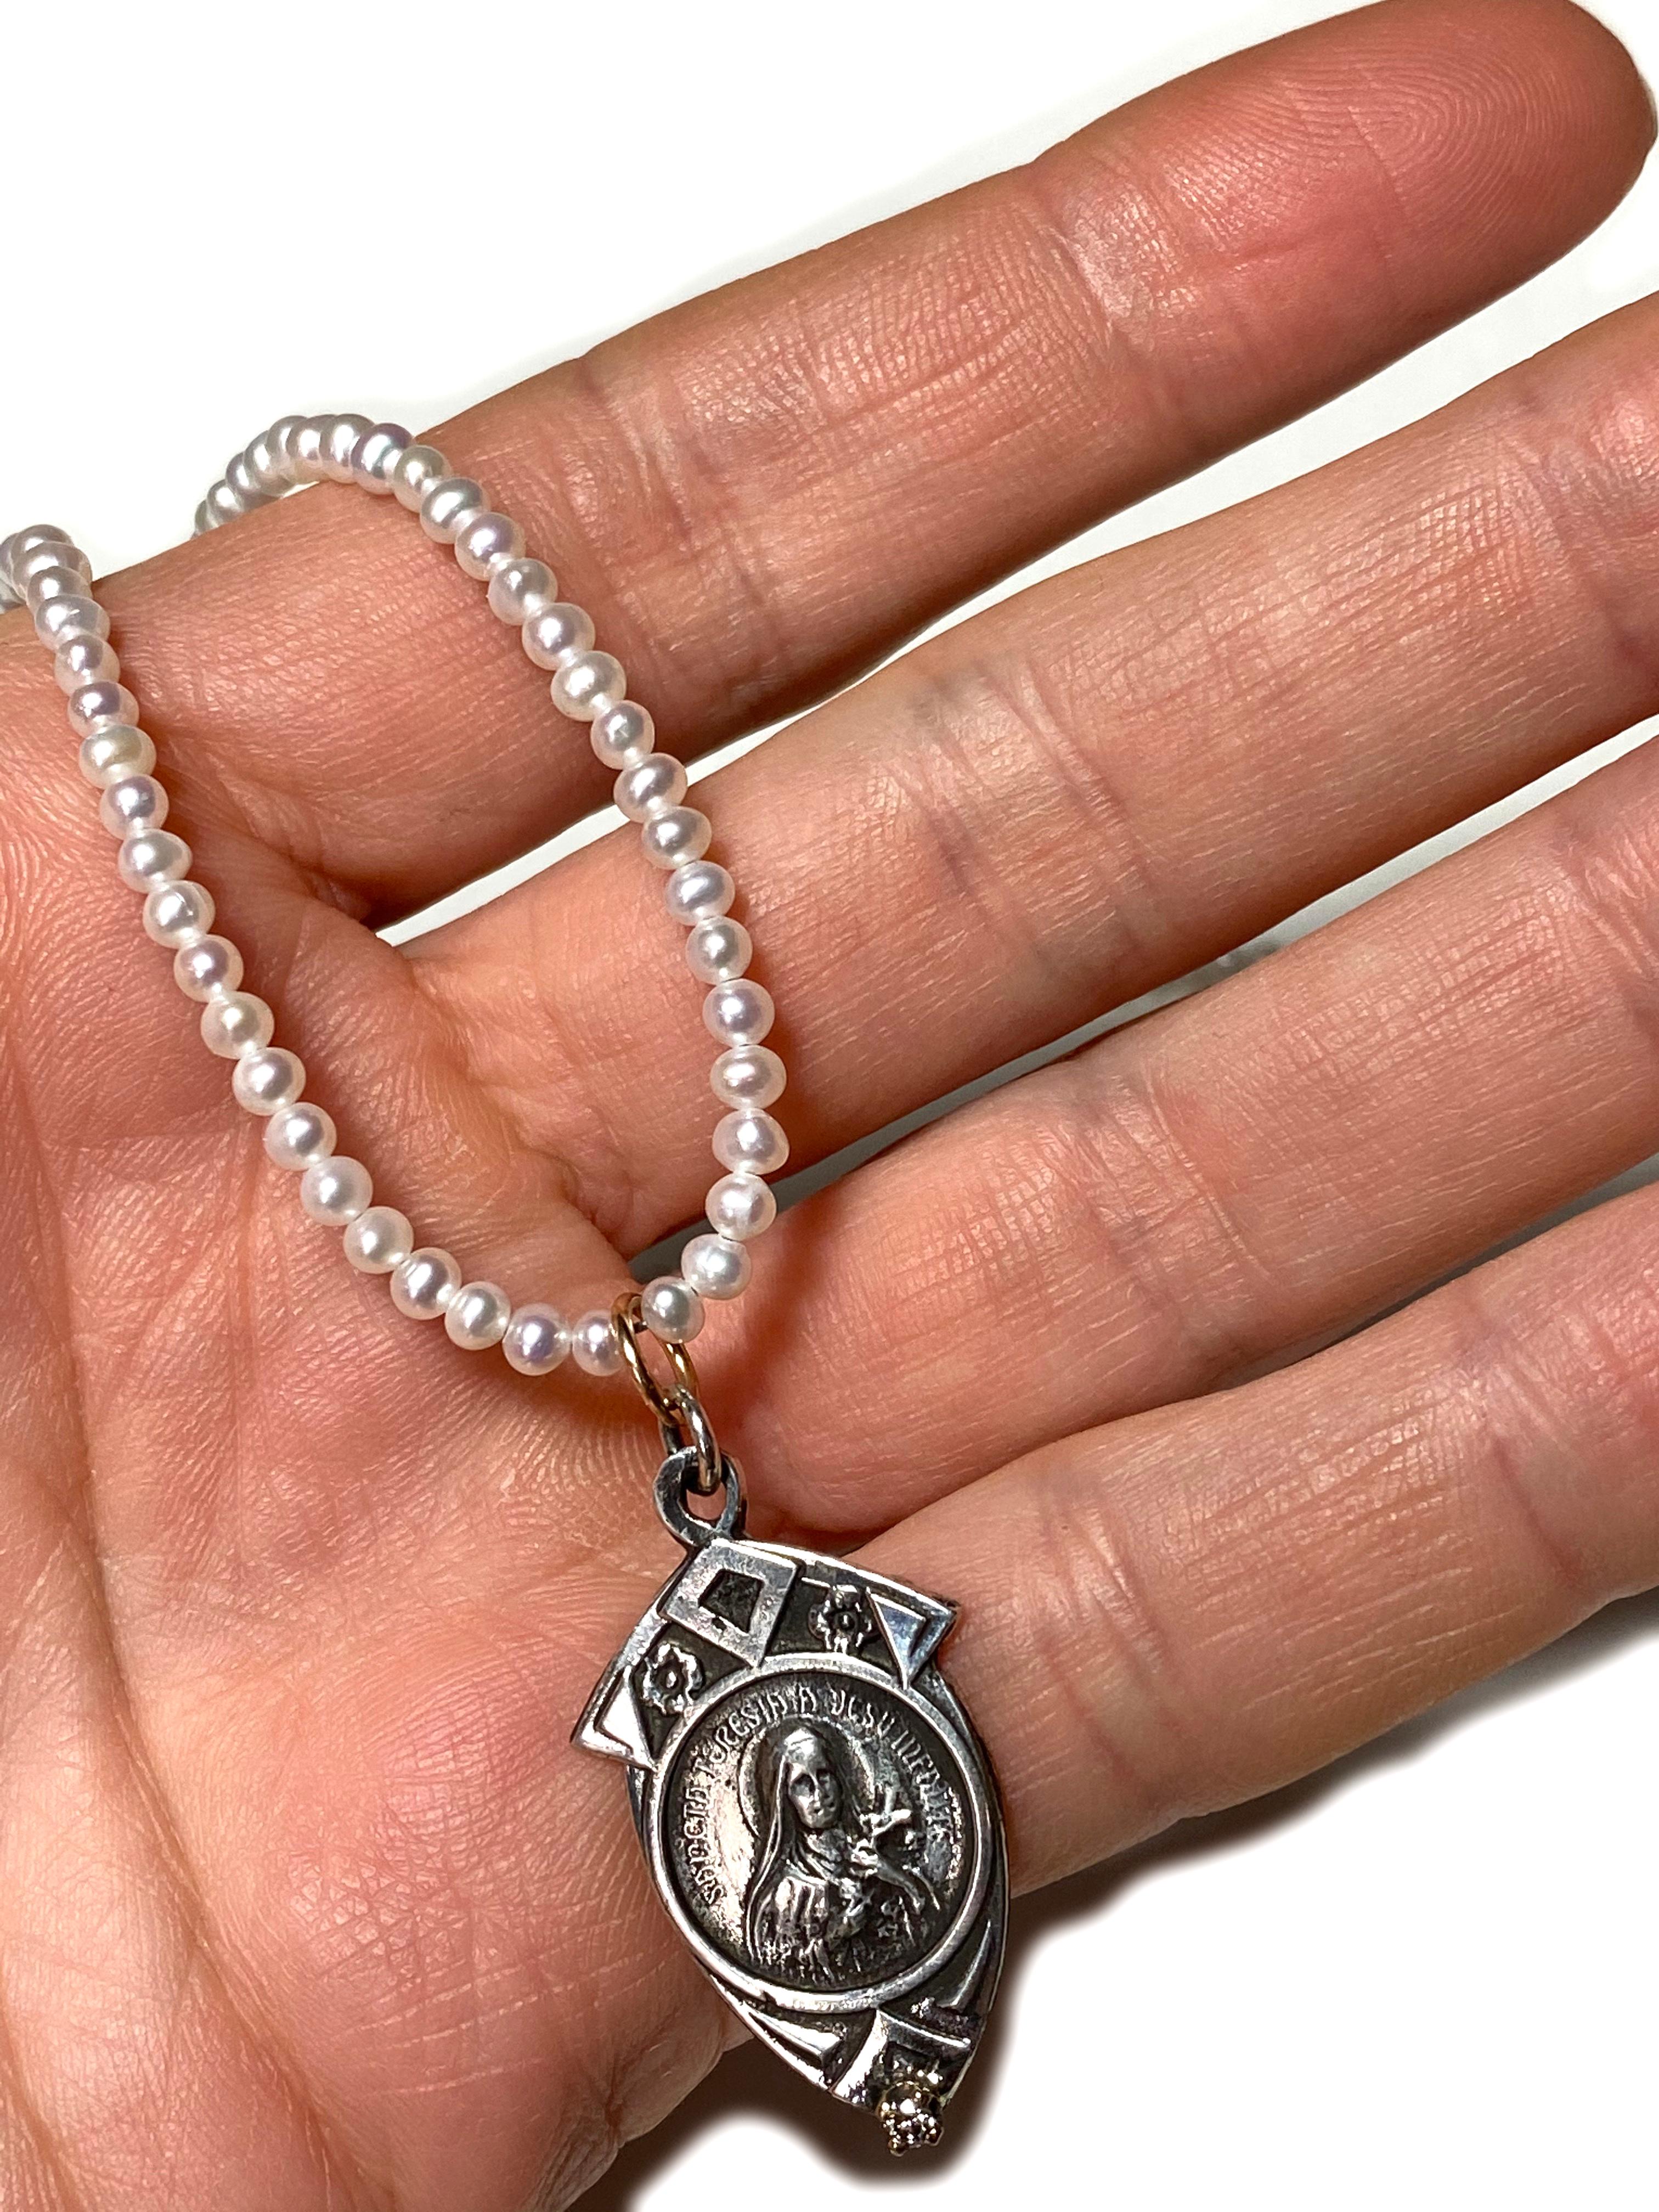 White Pearl Diamond Virgin Mary Bead Necklace J Dauphin

Exclusive piece with Virgin Mary pendant and an White Diamond set in a gold prong on a Silver Medal pendant. Bead Necklace is 16' long but can be made shorter or longer on request.

Symbols or